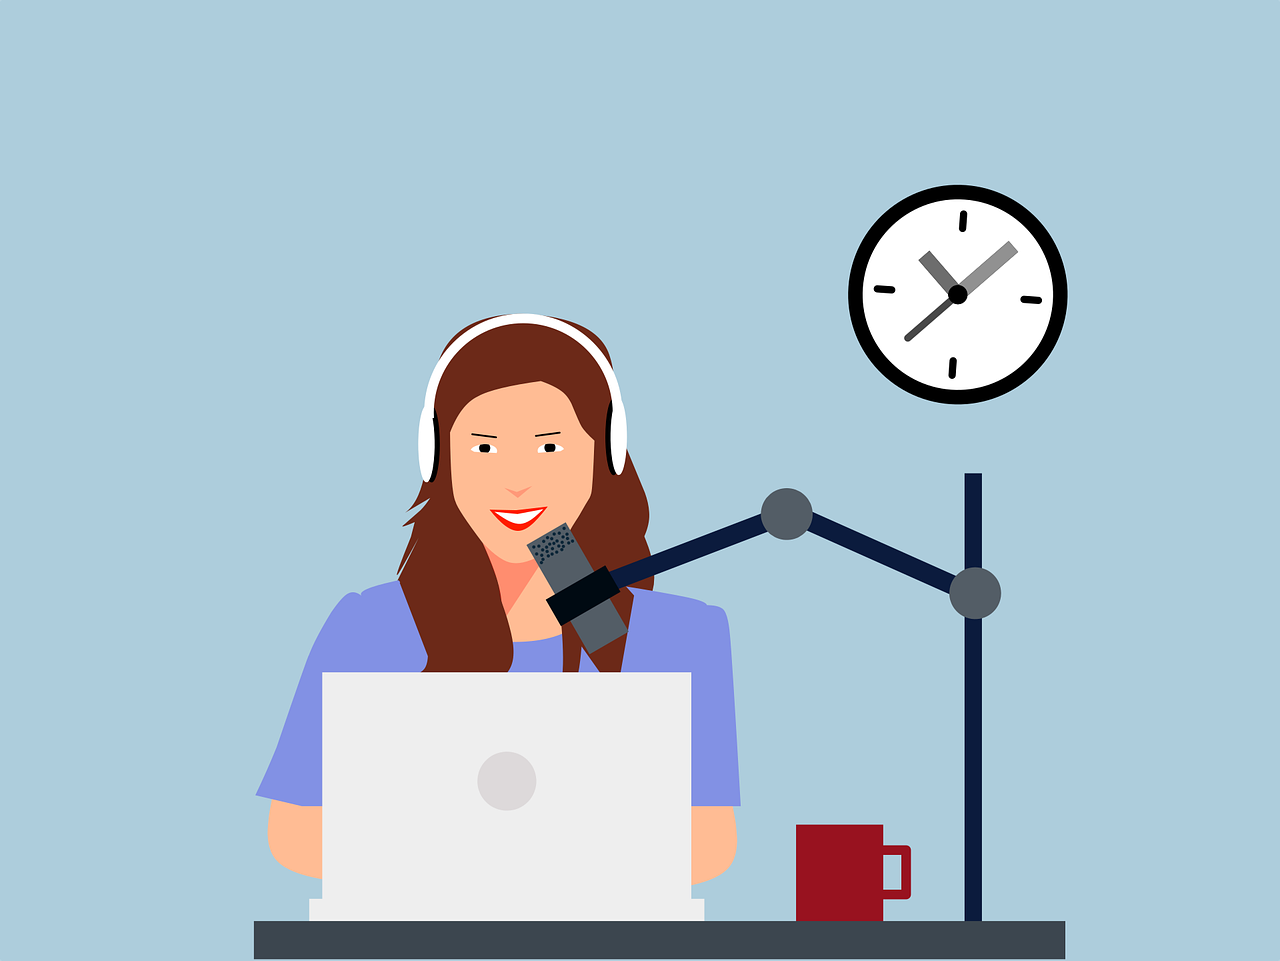 Illustration showing a lady broadcasting with a laptop and microphone with a clock on the wall behind her.